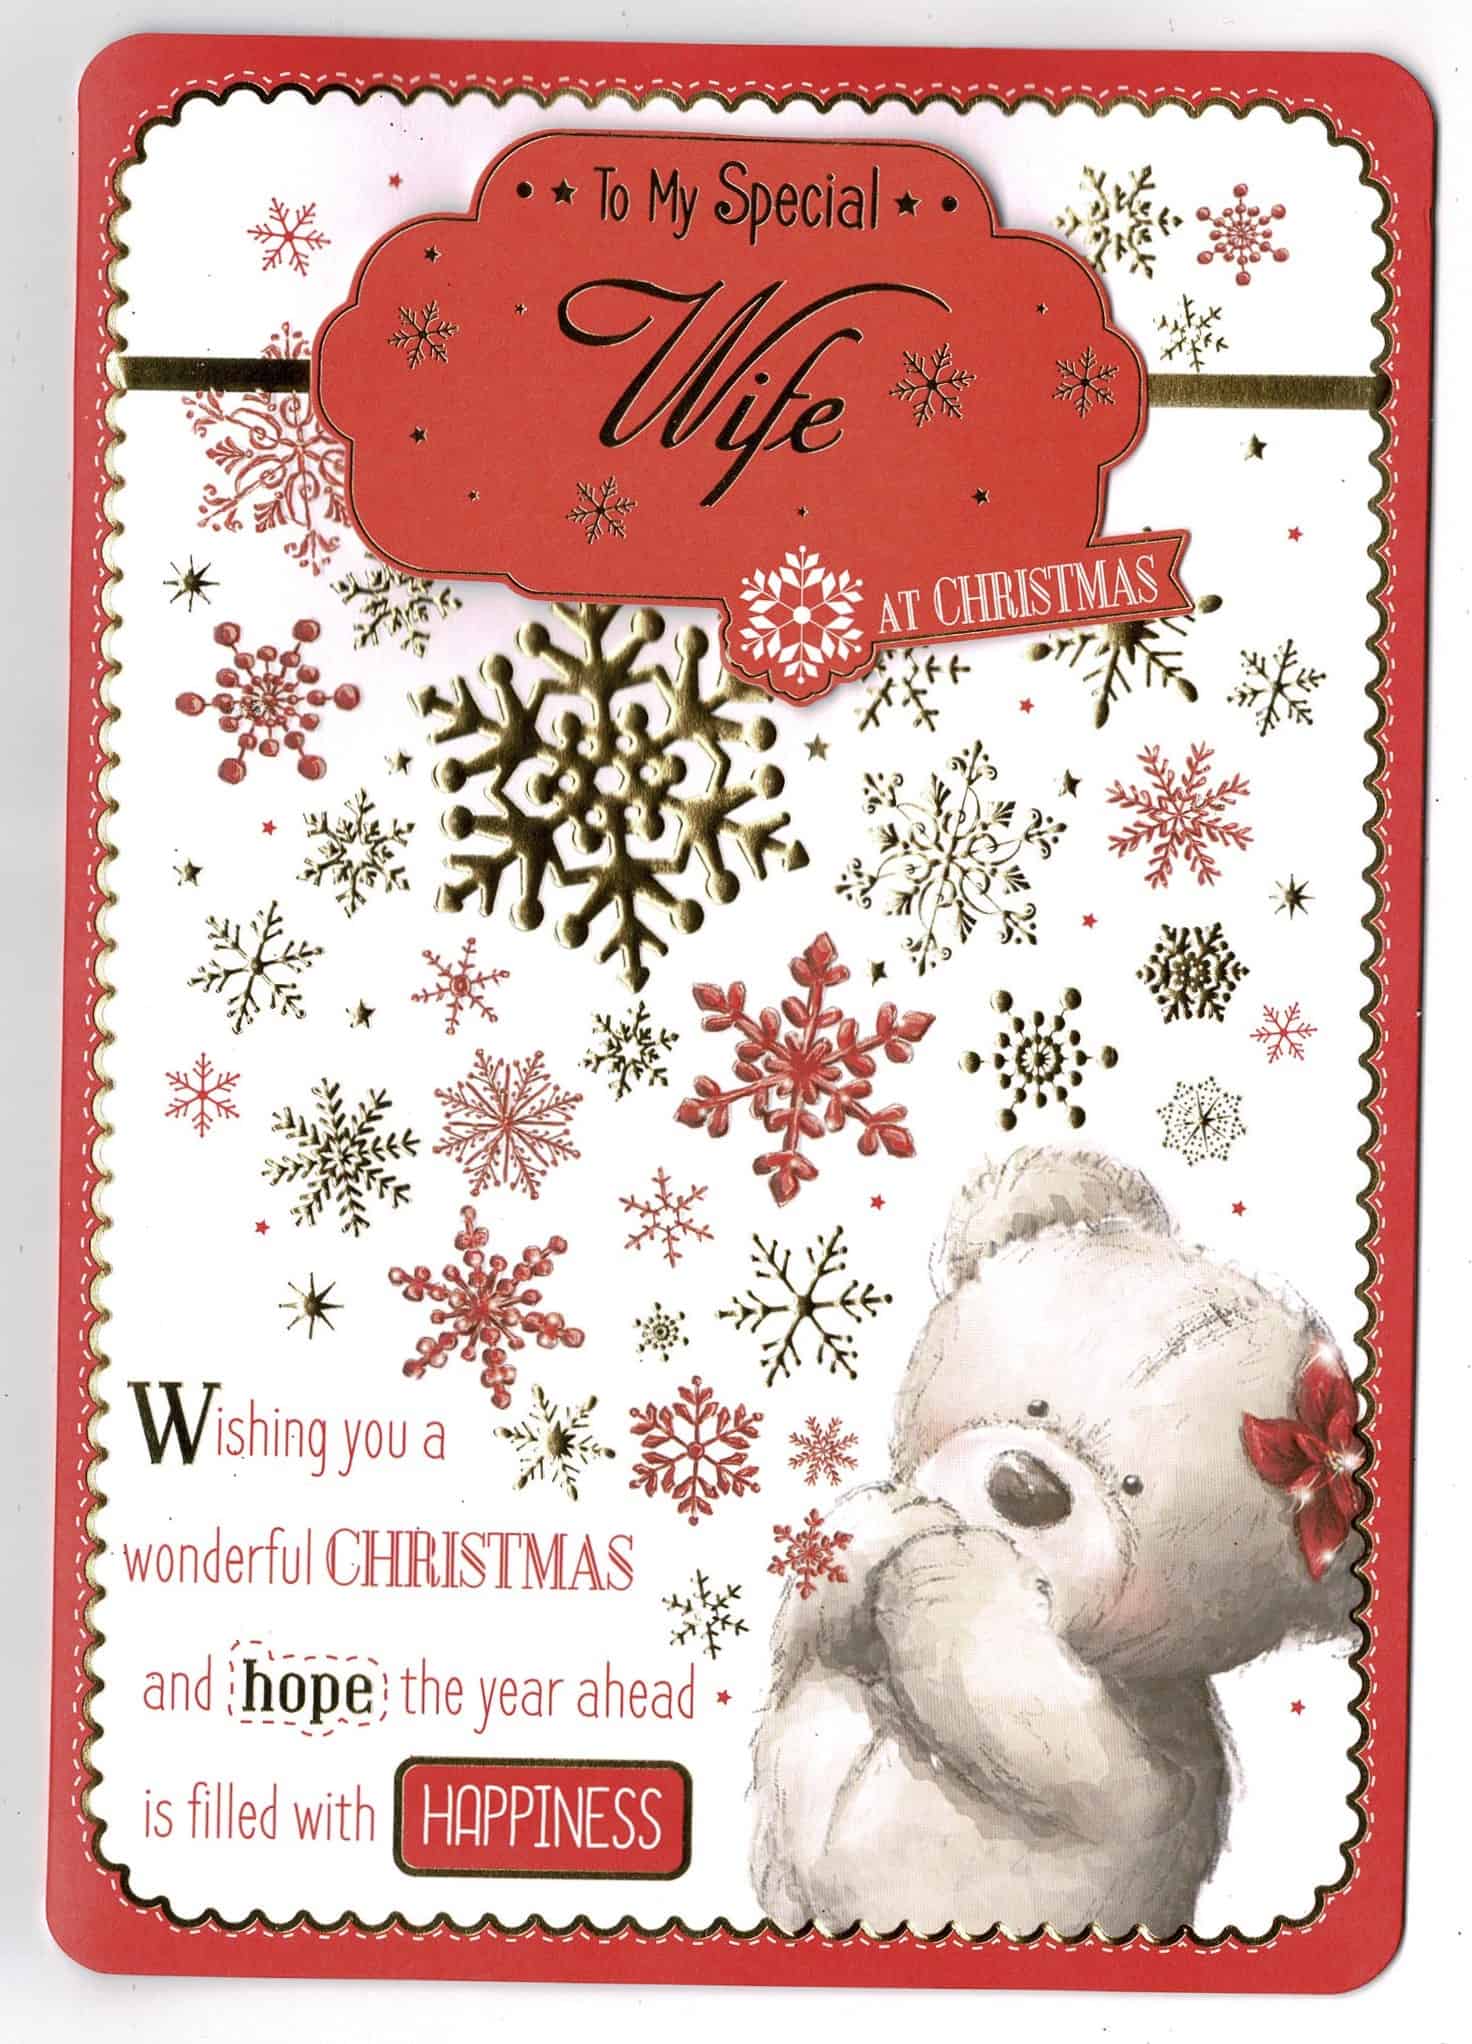 Wife Christmas Card To My Special Wife With Love Gifts Cards